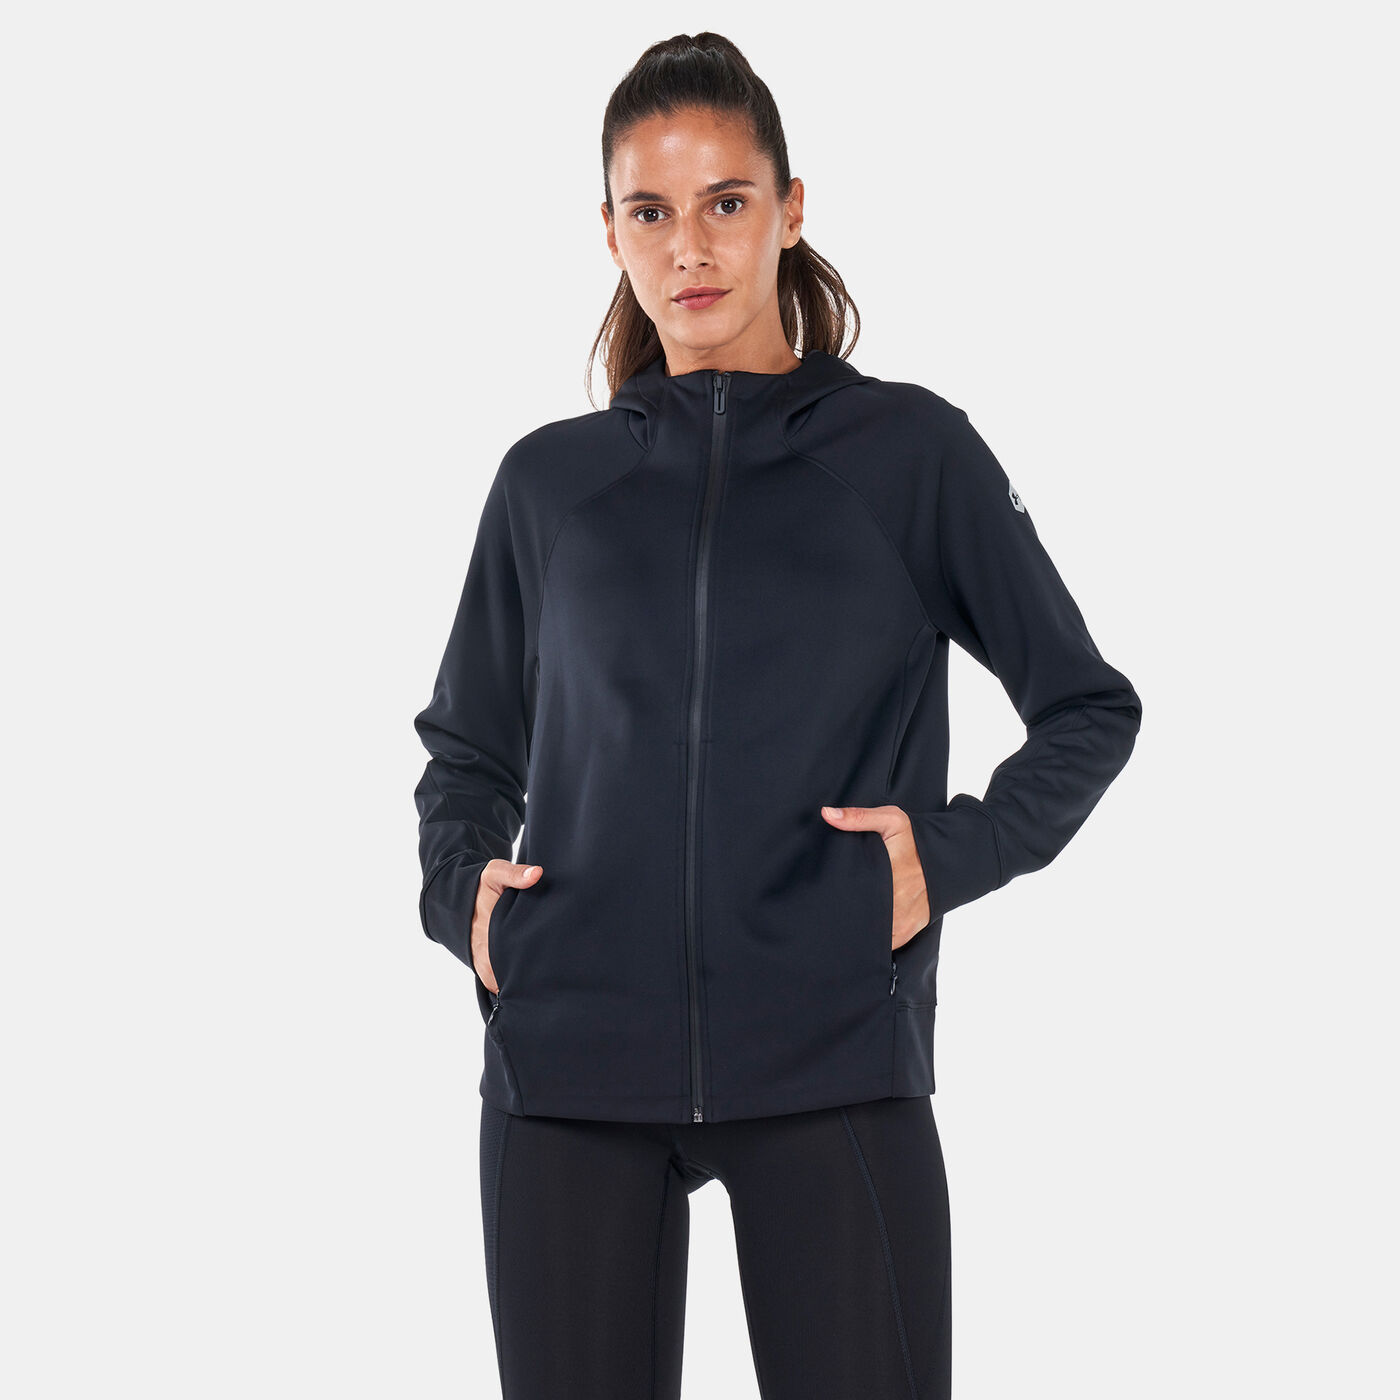 Women's Athlete Recovery Track Jacket